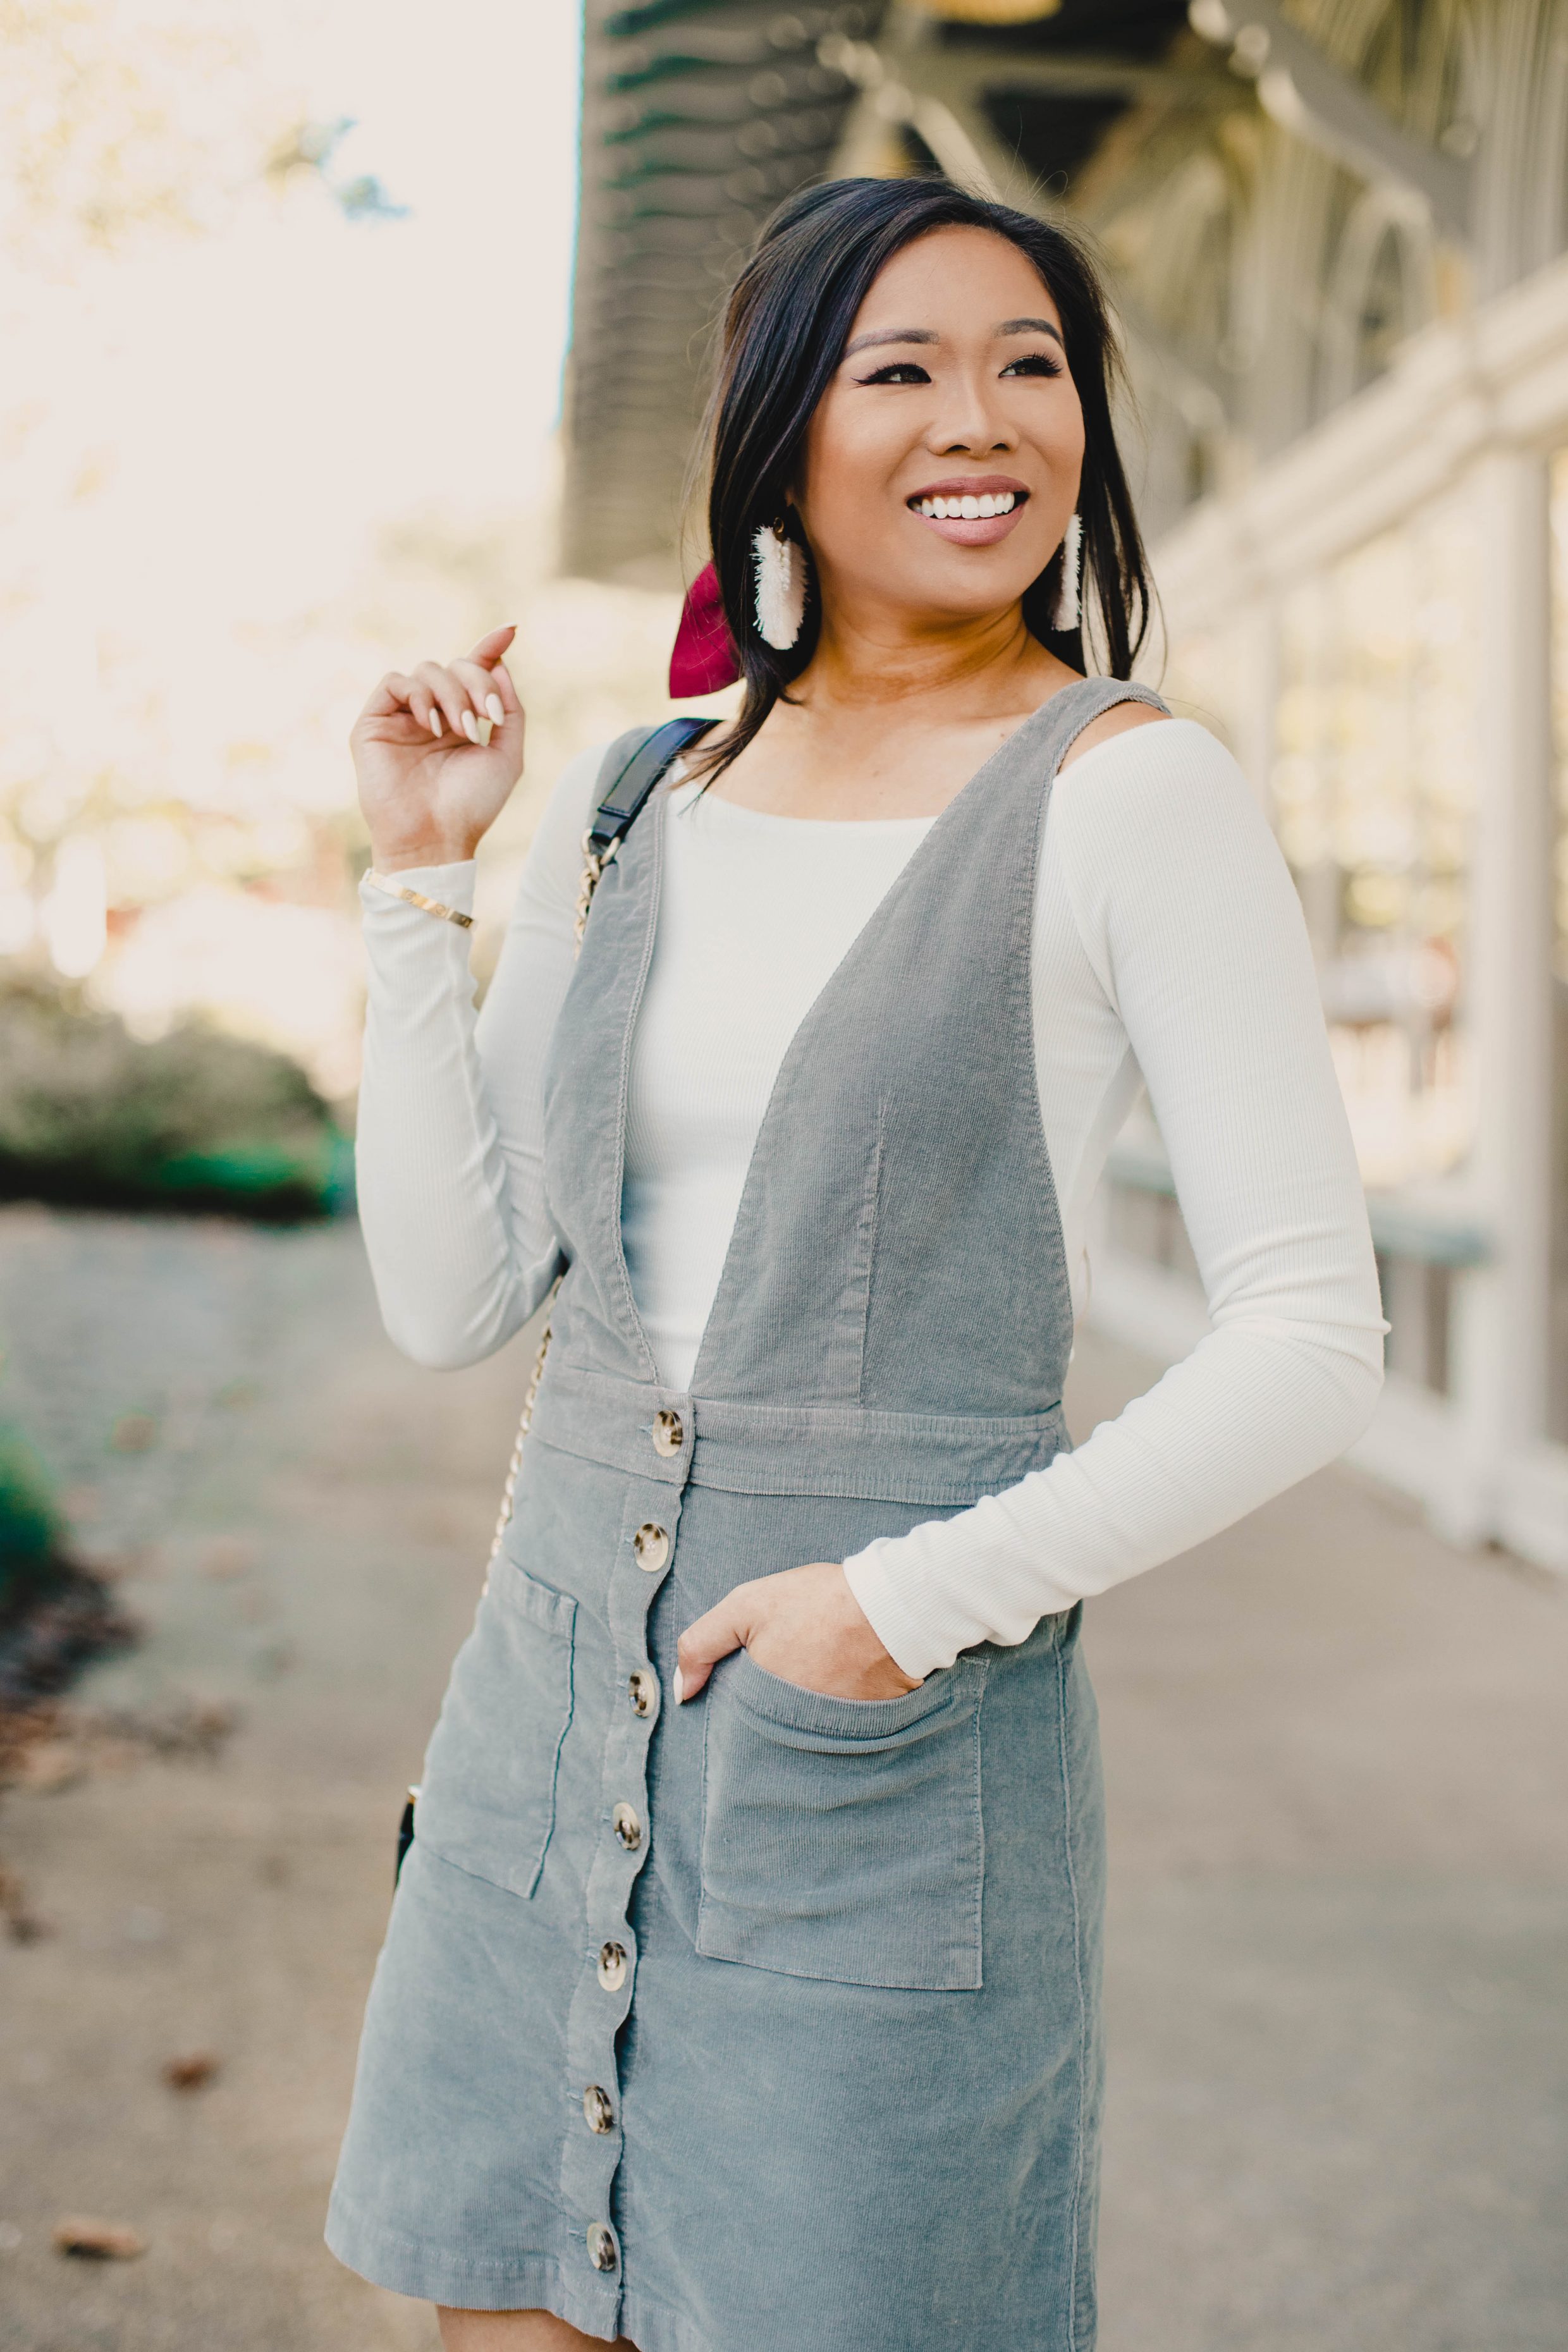 Blogger Hoang-Kim wears a Show Me Your Mumu corduroy overall dress with a white off-the-shoulder top for fall